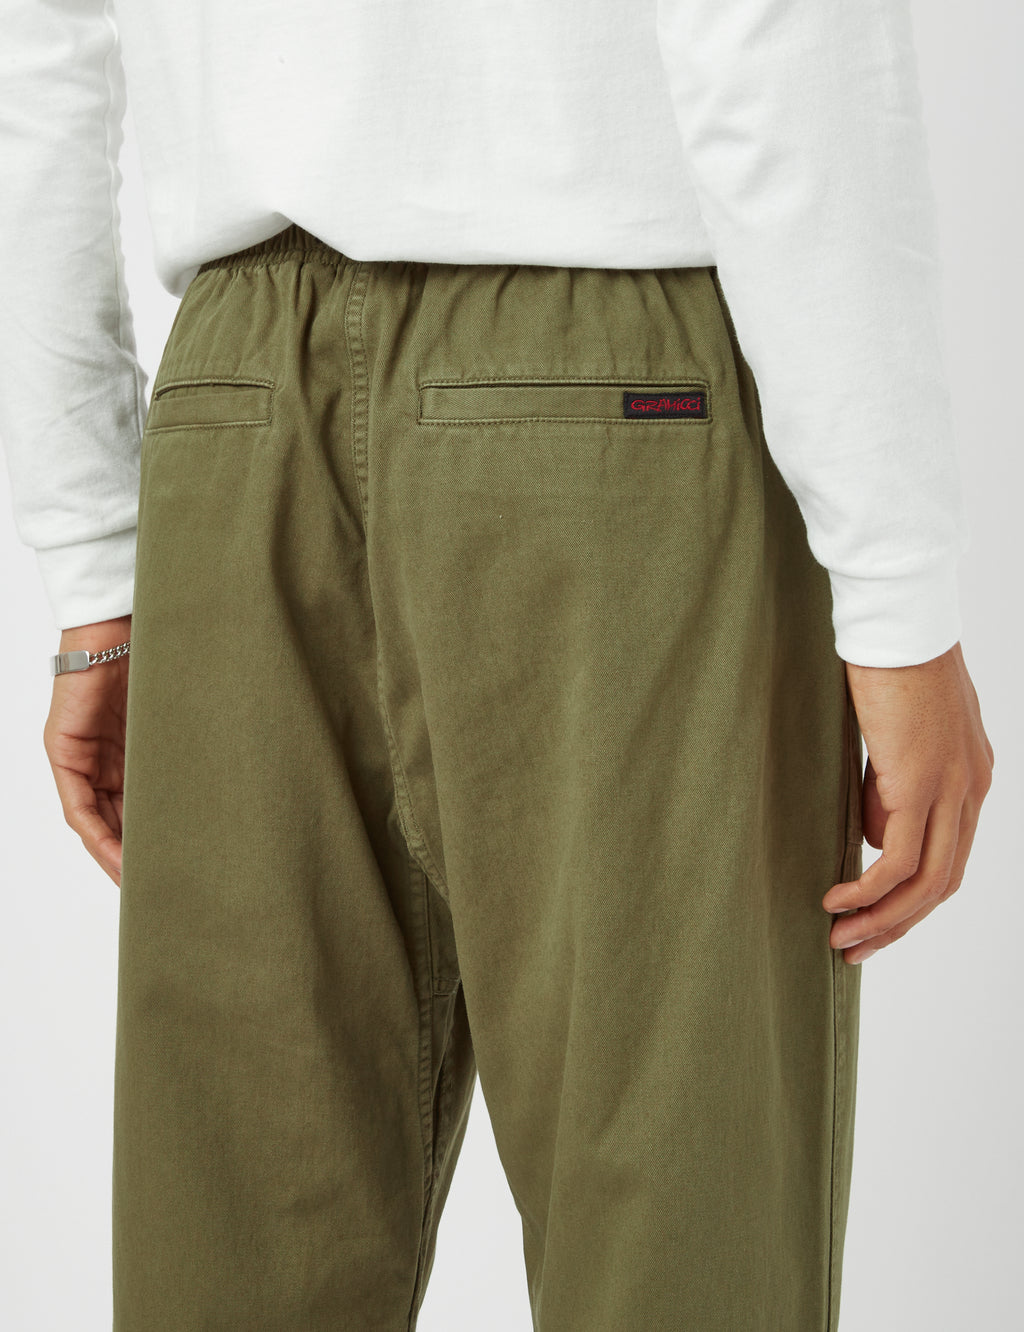 Shop Big Sur Ferns Gramicci Loose Tapered Pant Inspired by Big Sur